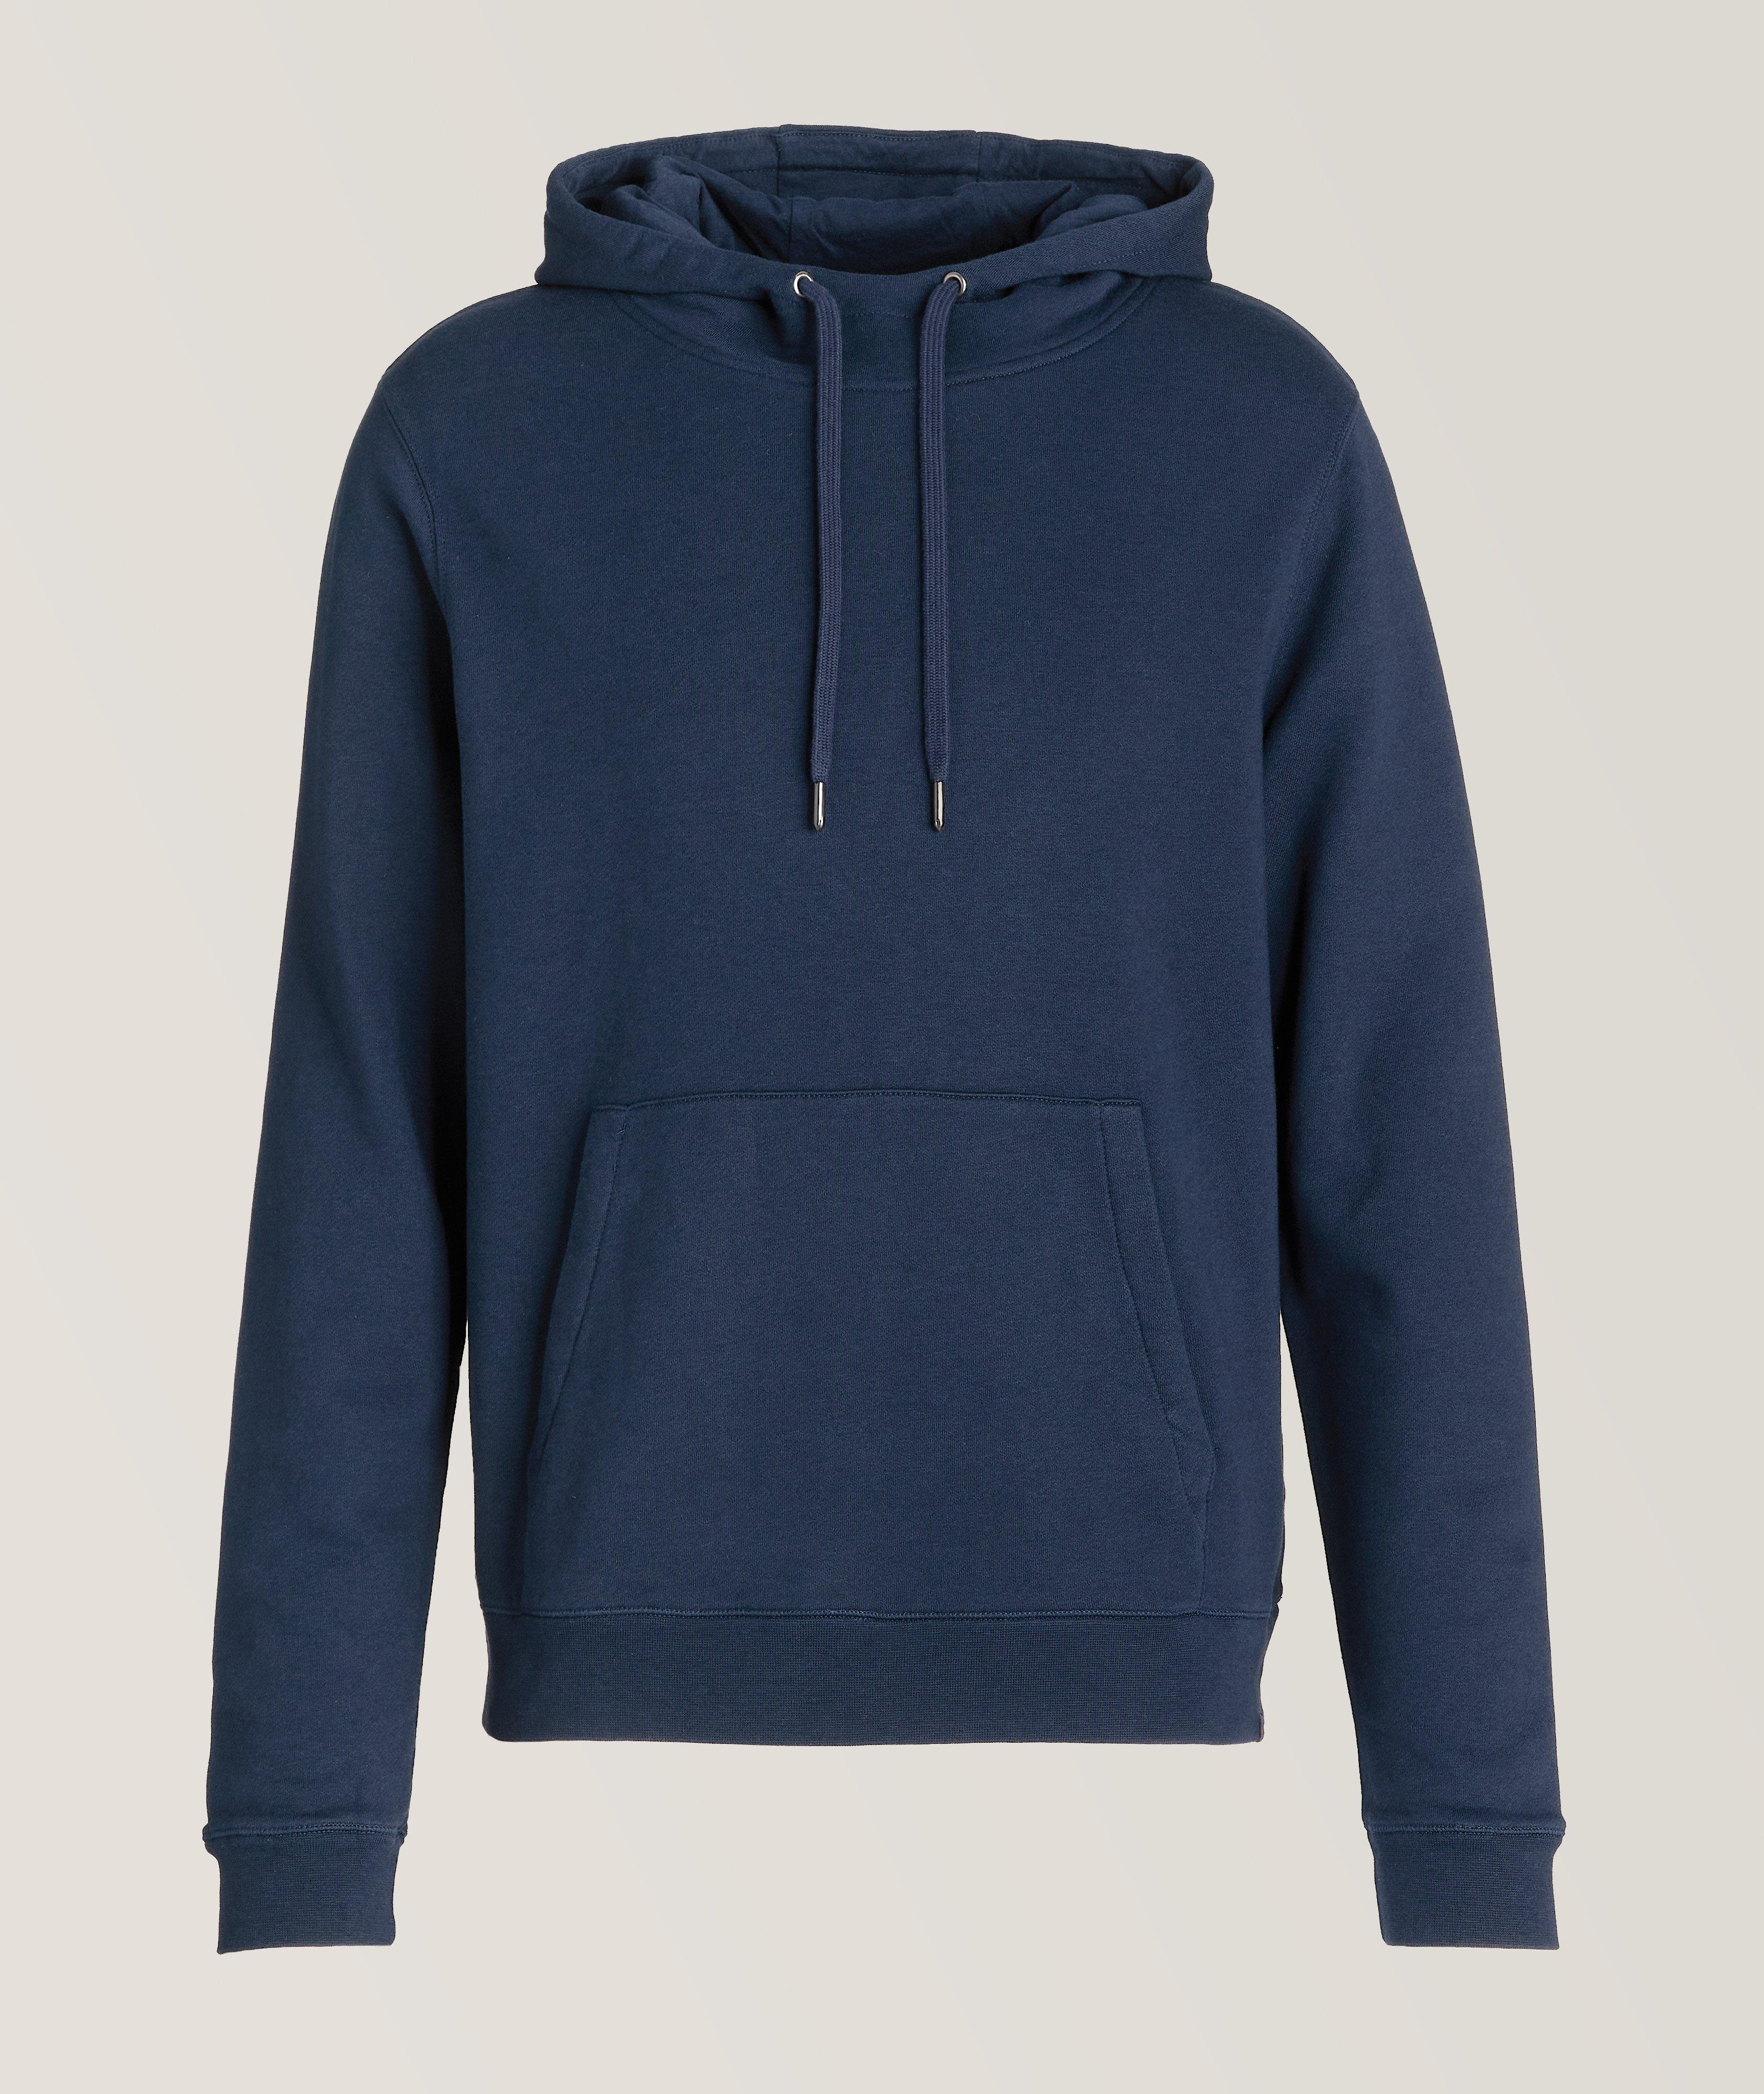 Quinn Cotton-Modal Hooded Sweater image 0